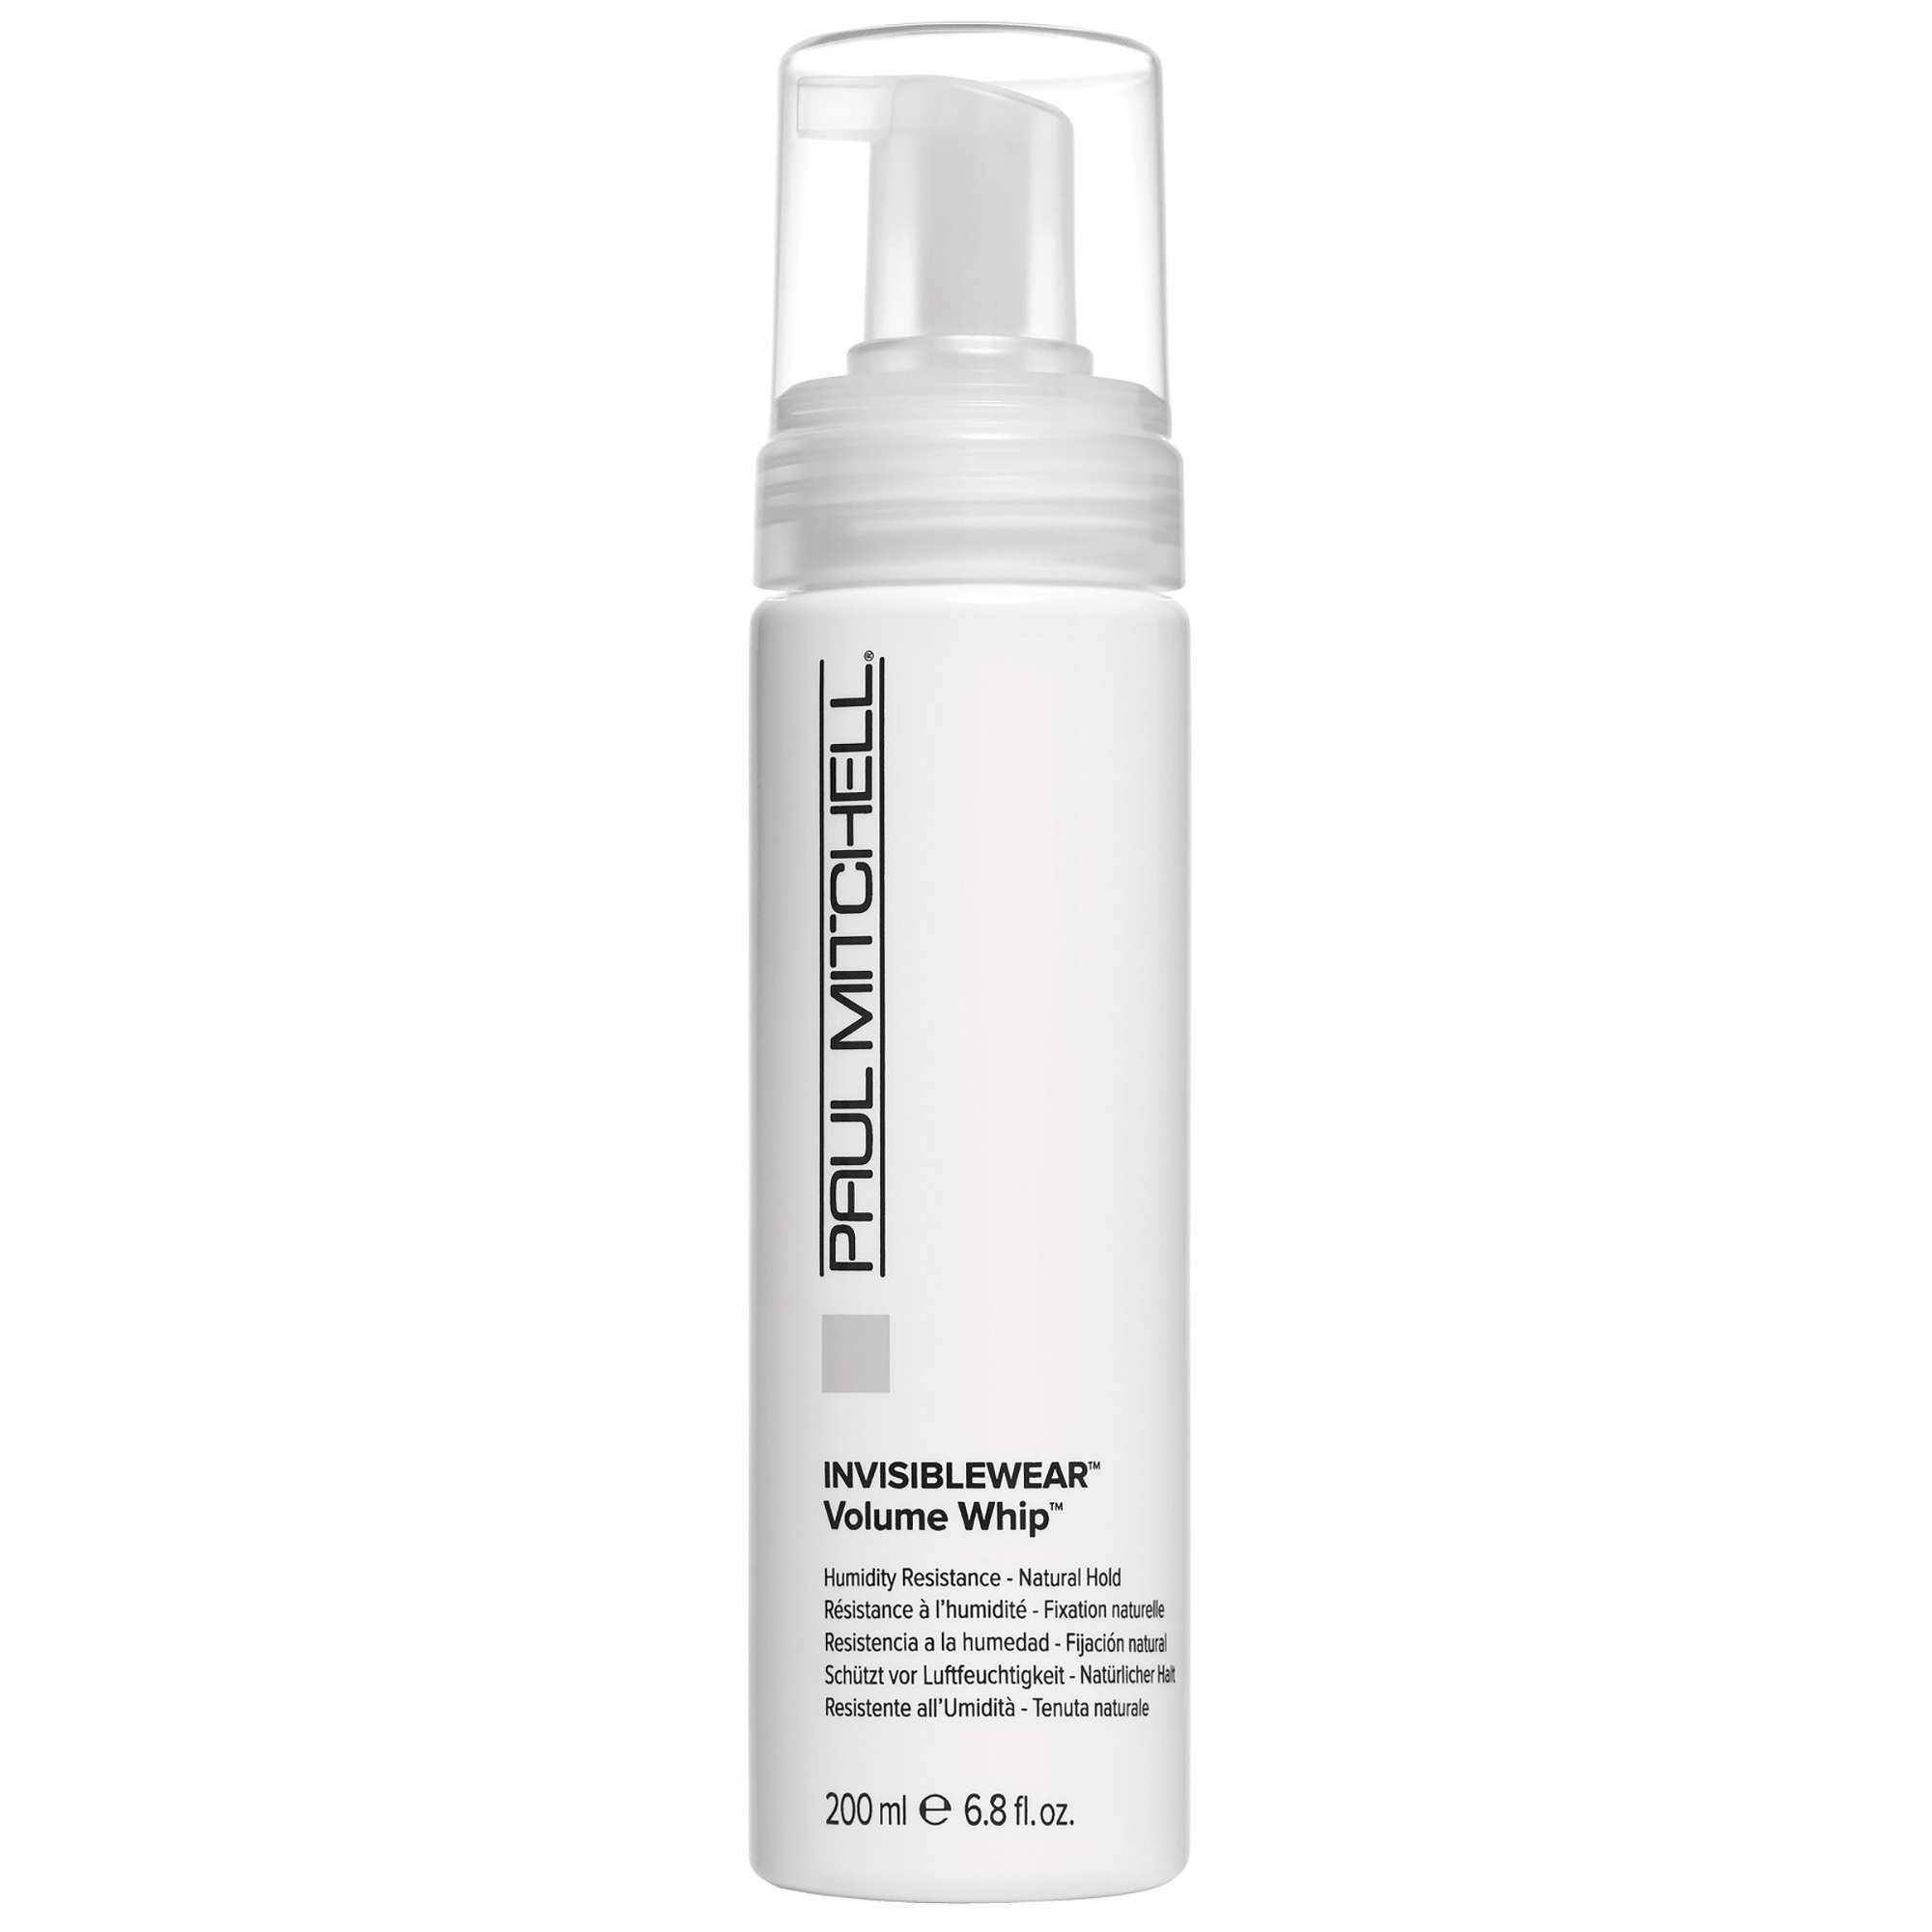 Photos - Hair Styling Product Paul Mitchell Invisiblewear Volume Whip 200ml 